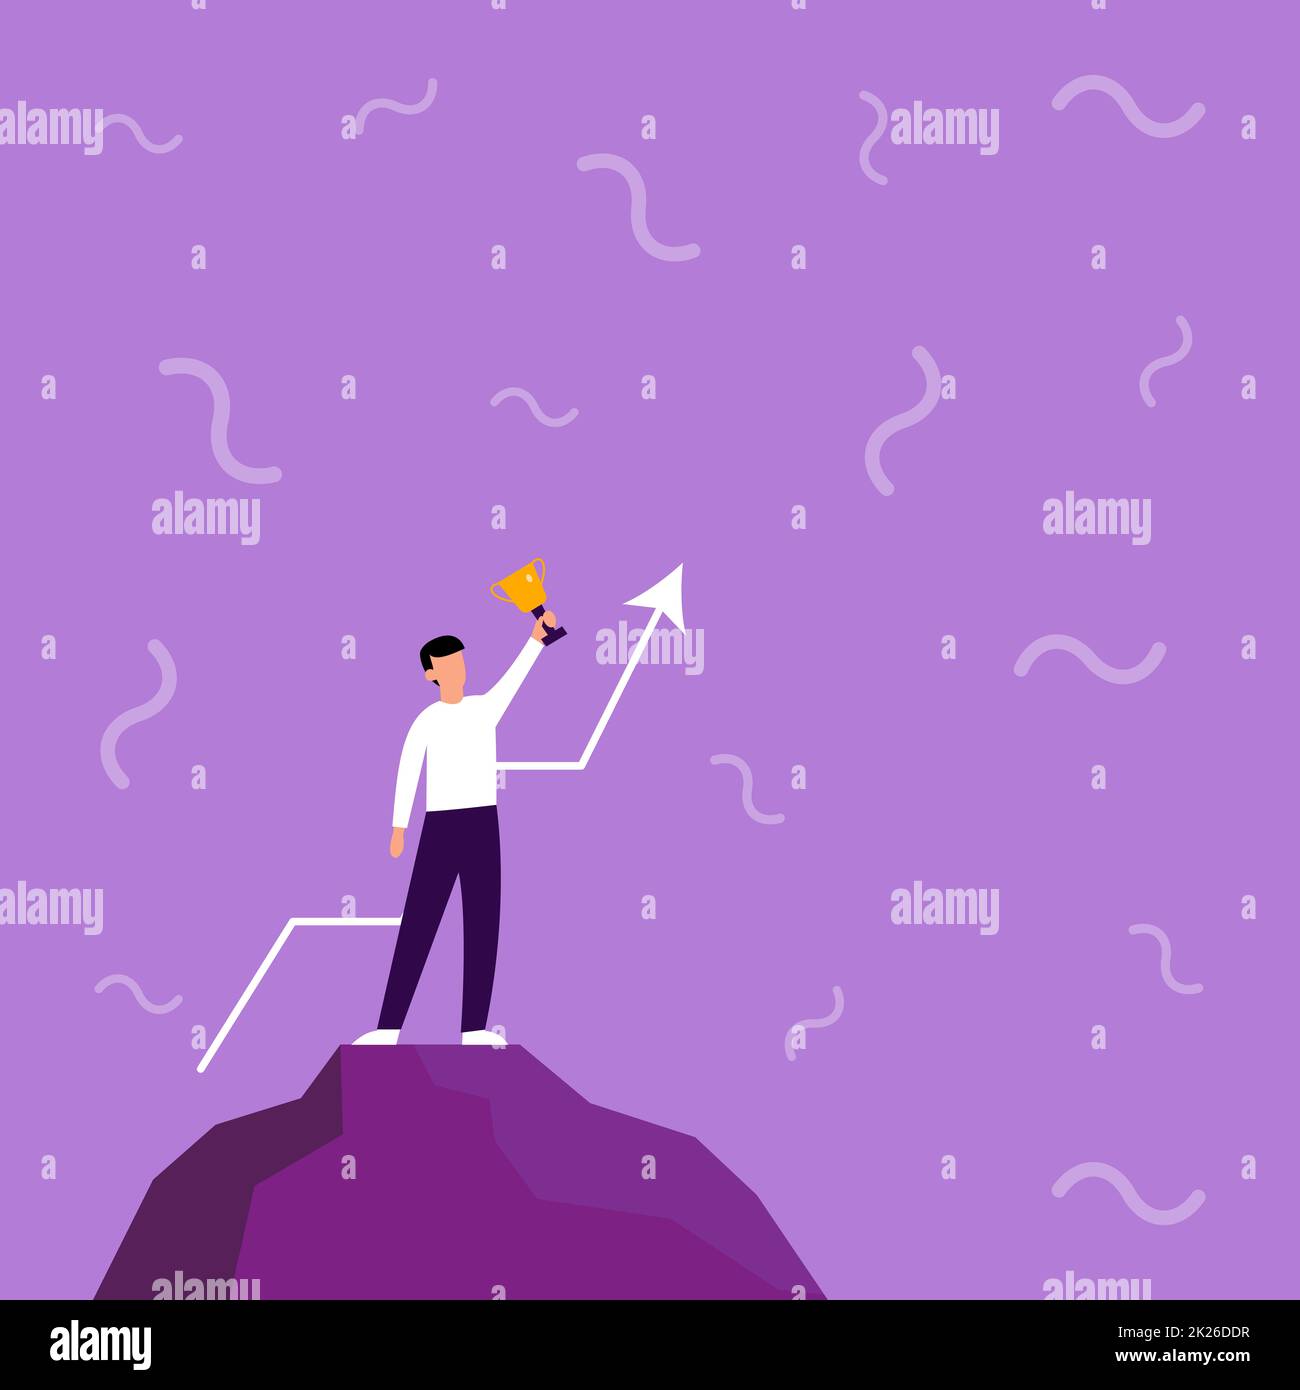 Illustration Of Businessman Standing Alone On Big Rock Proudly Holding Up High Trophy. Man Drawing Top Of Cliff Hanging One Handed Shiny Golden Cup . Stock Photo